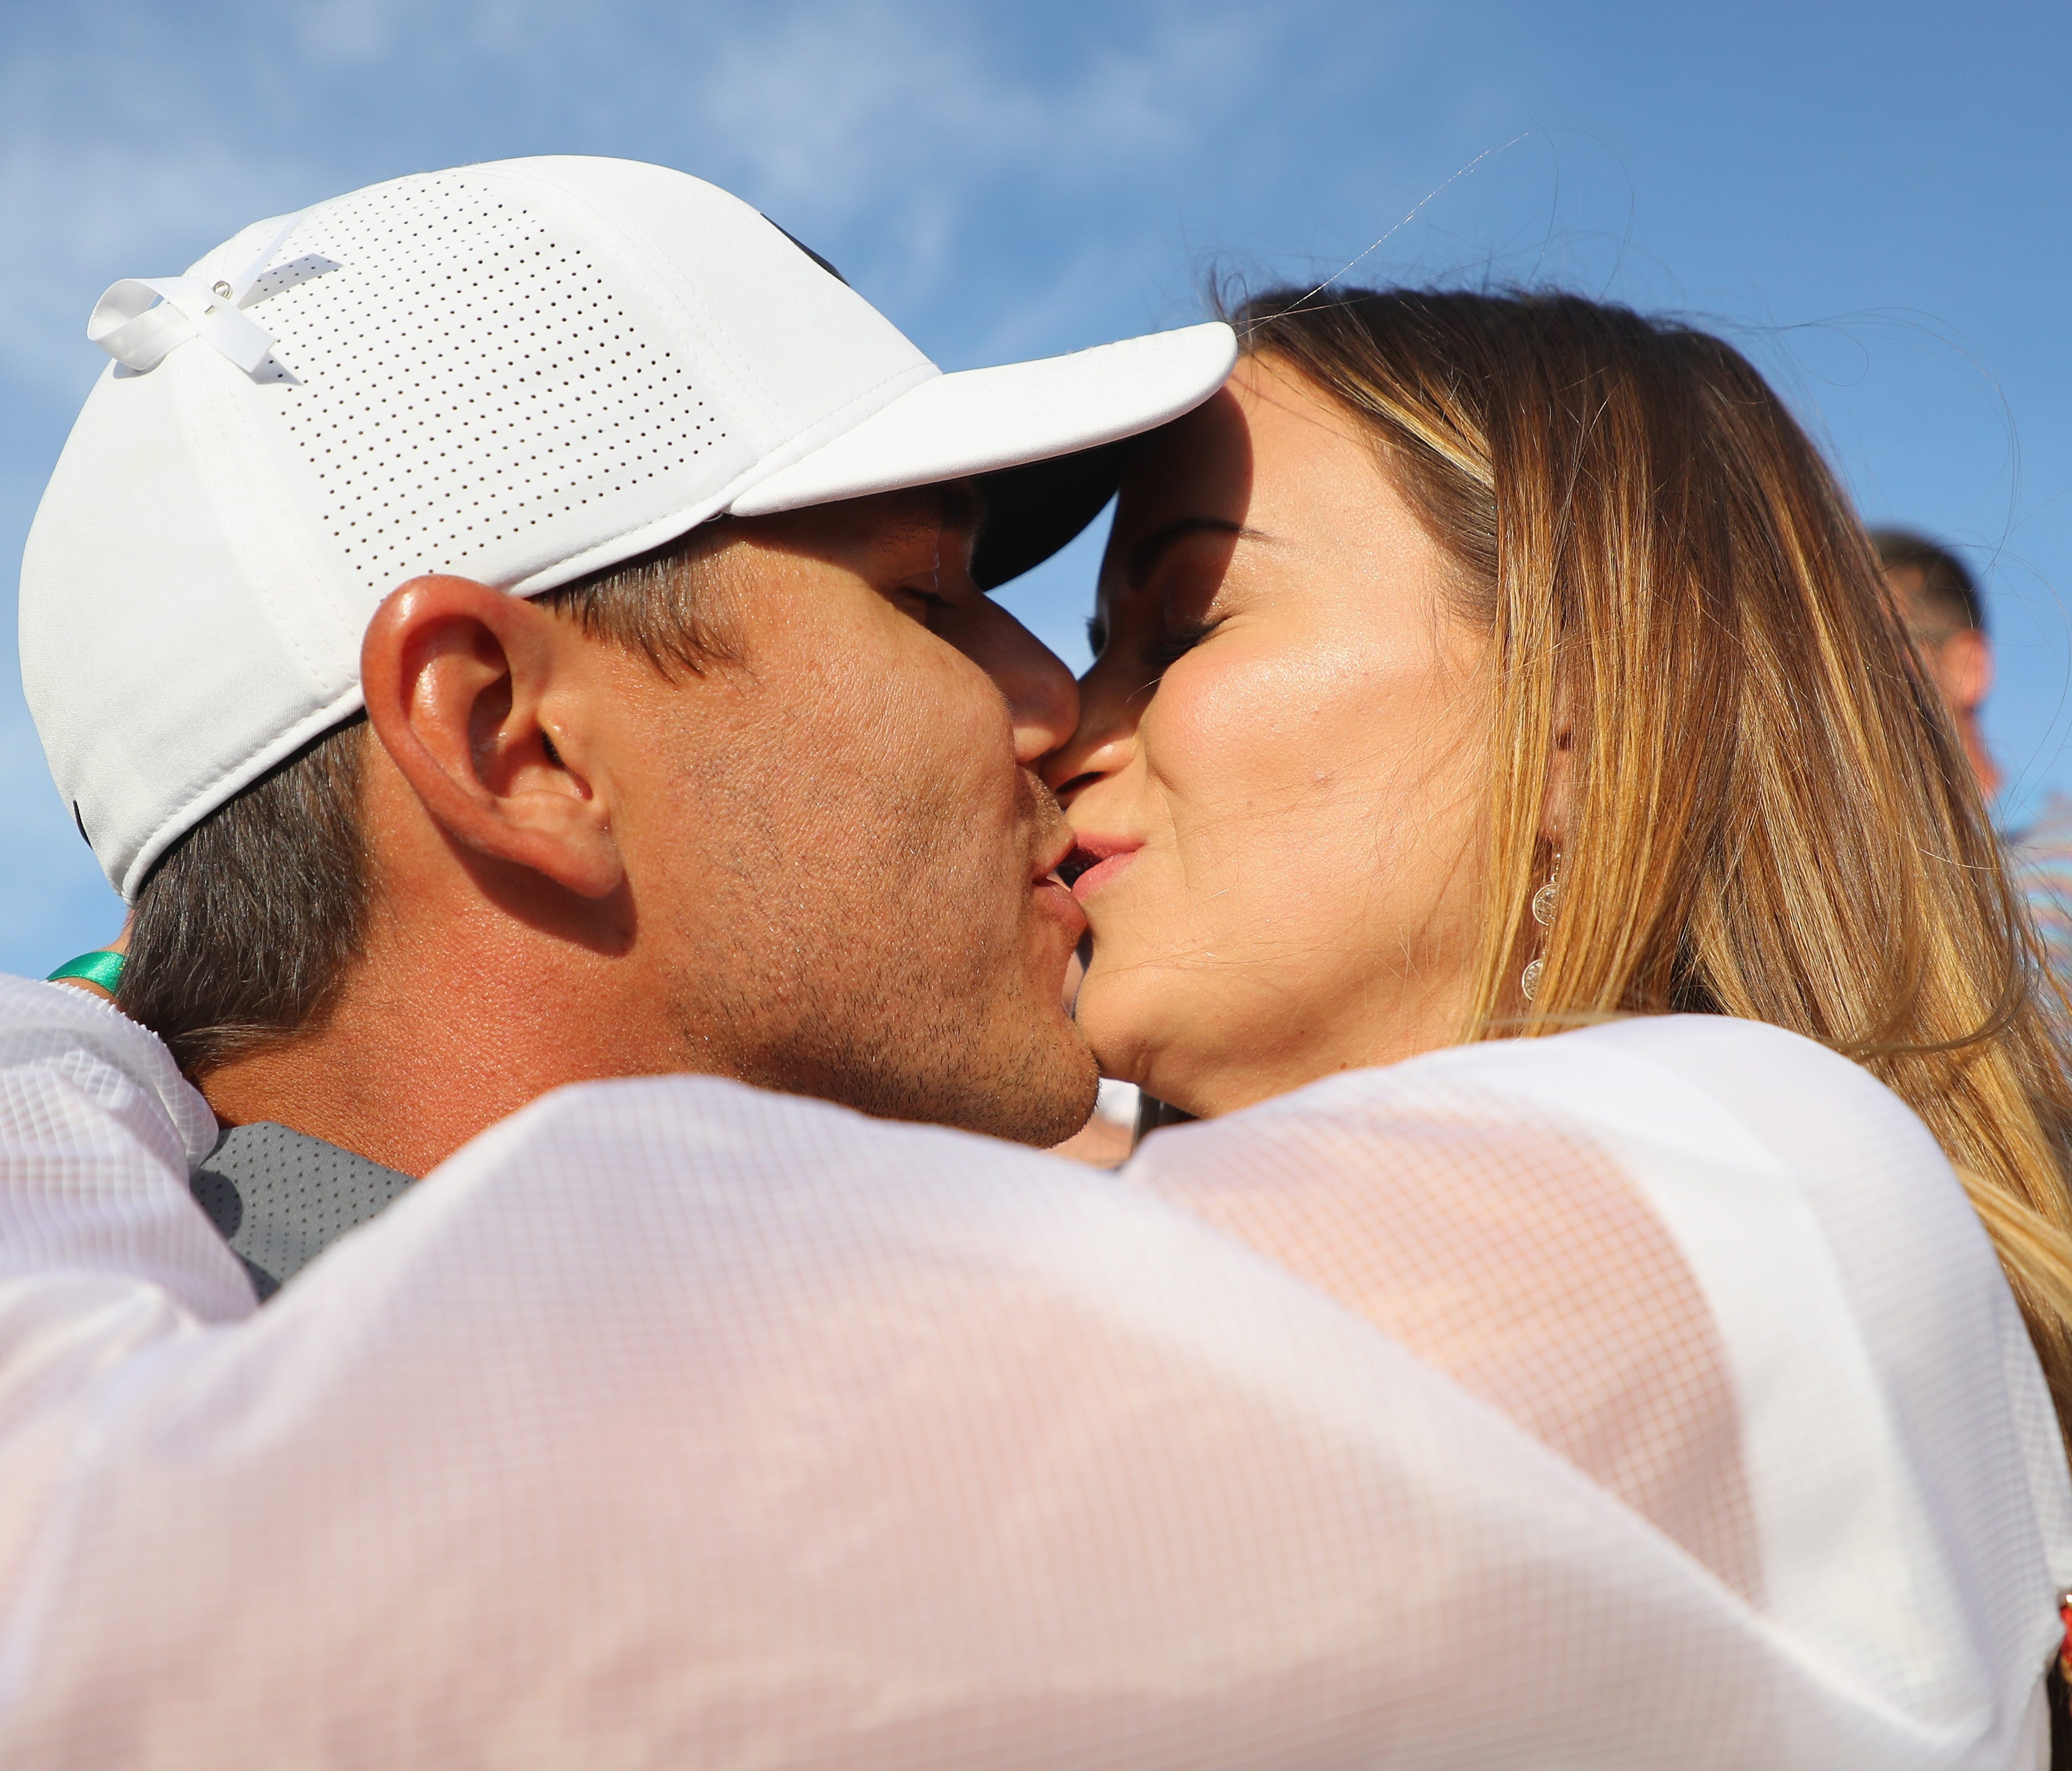 Brooks Koepka kisses girlfriend Jena Sims after winning the U.S. Open on Sunday at Shinnecock Hills. Koepka shot a final-round 68 to finish the tournament at 1 over par, one shot better than Tommy Fleetwood.